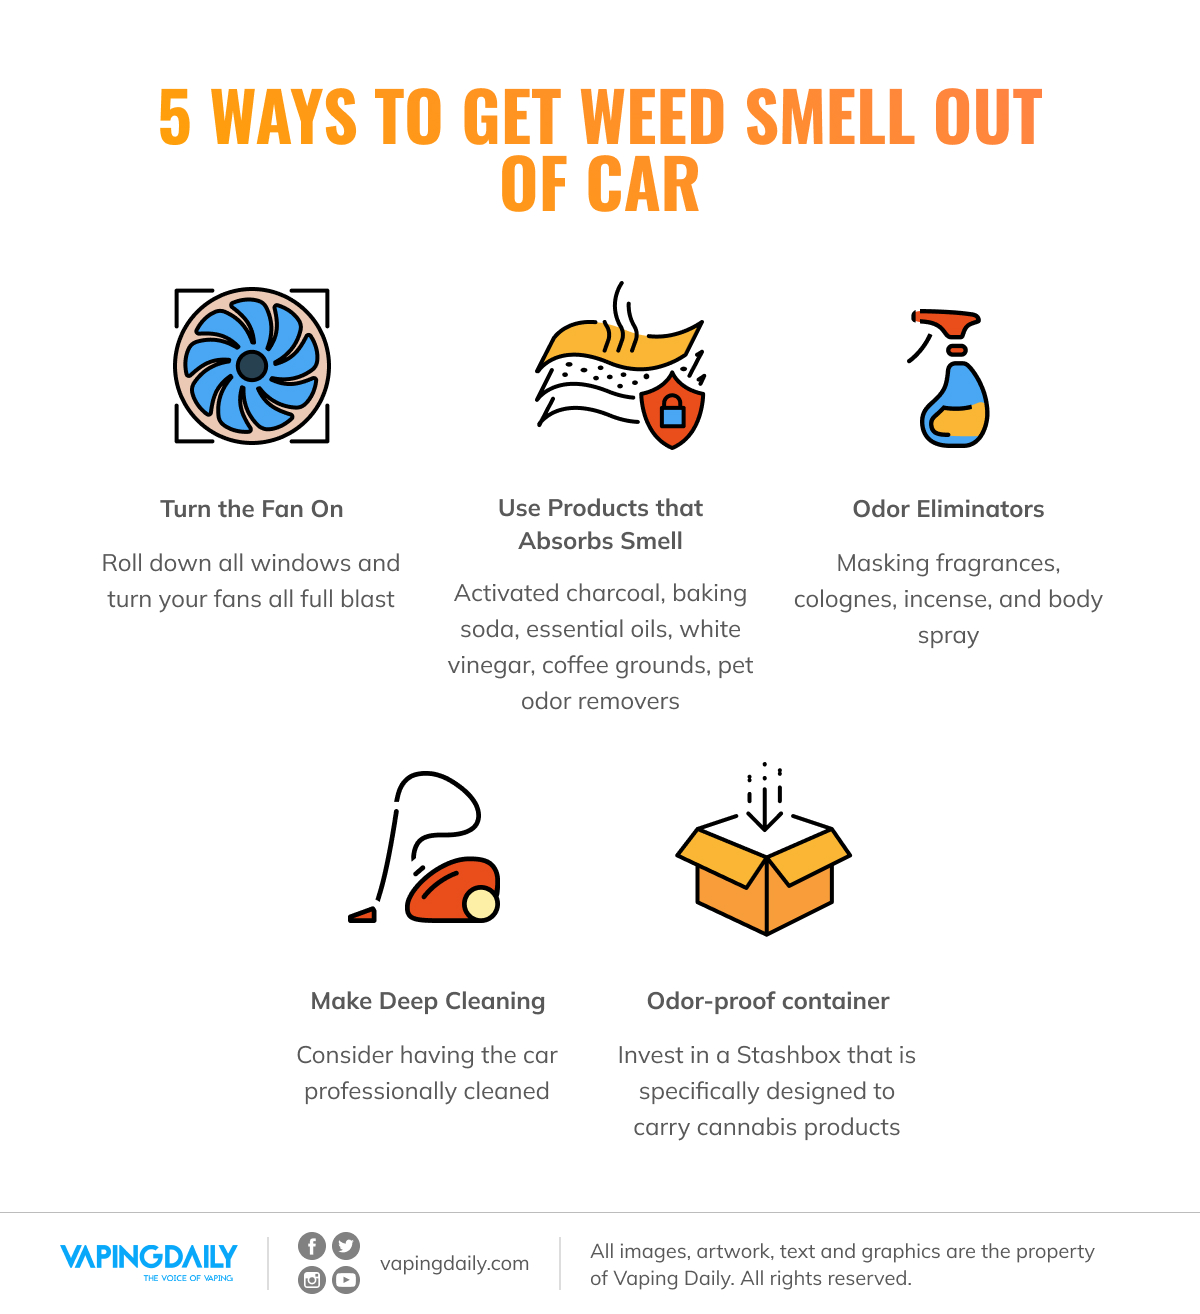 5 Ways to Get Weed Smell Out of Car